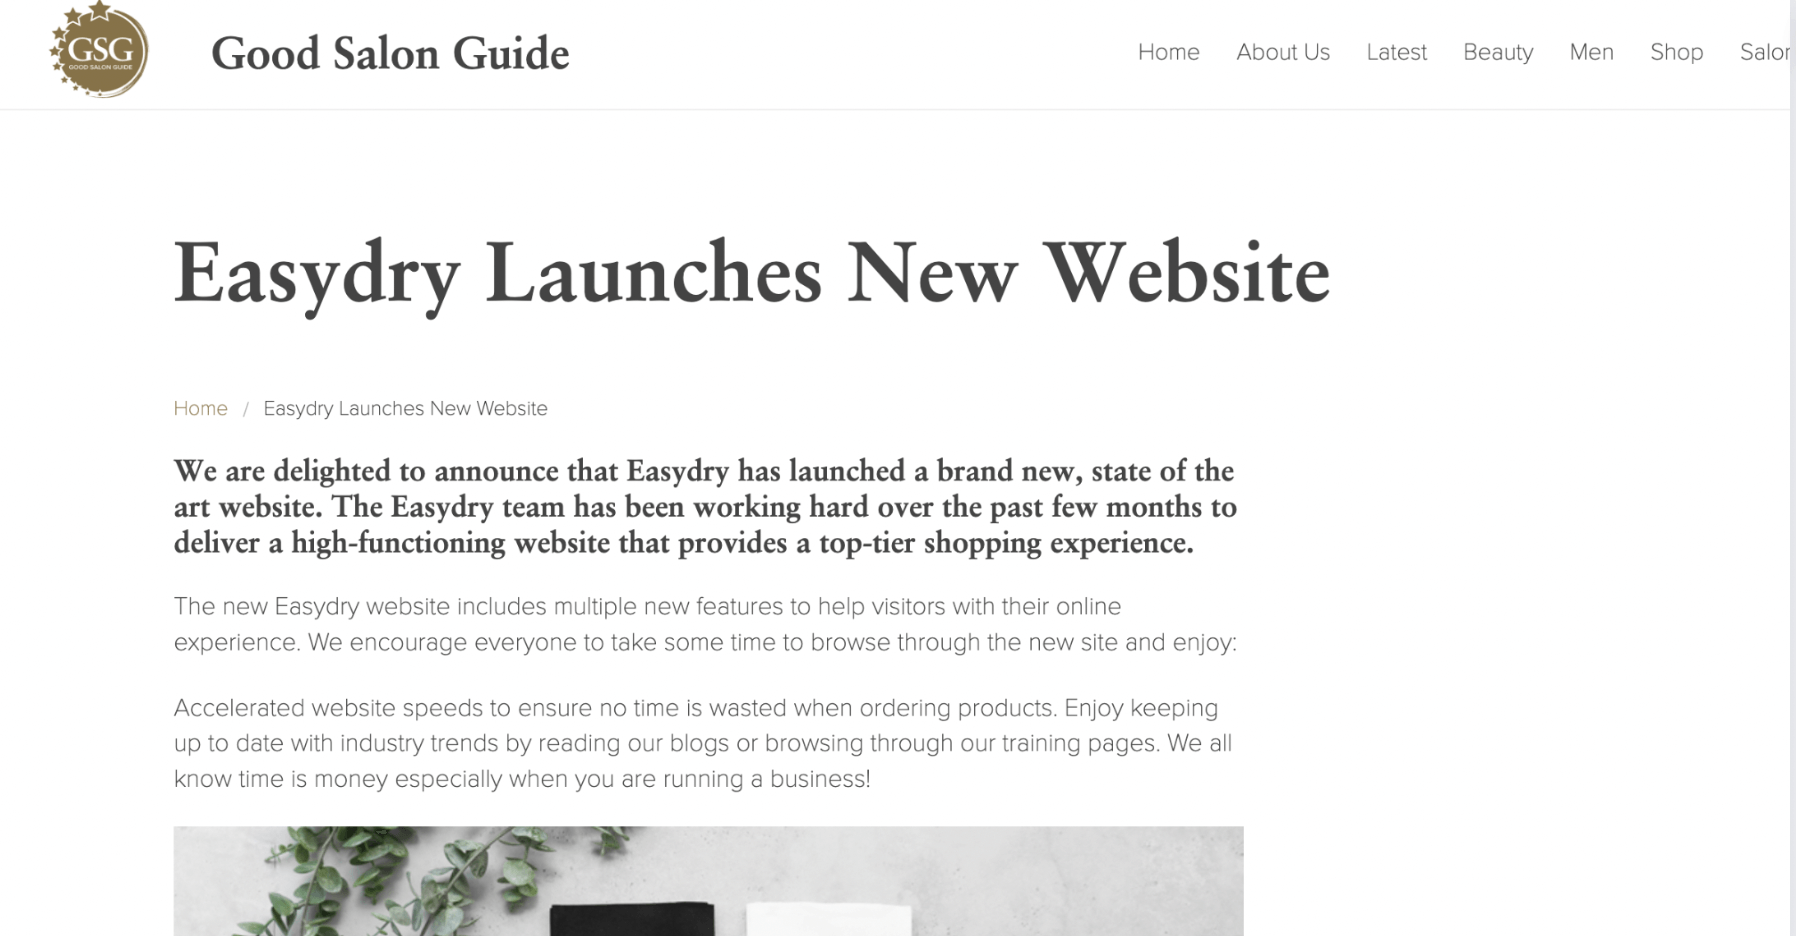 Good Salon Guide: check out this recent press coverage of the launch of the new Easydry website on the Good Salon Guide Website.